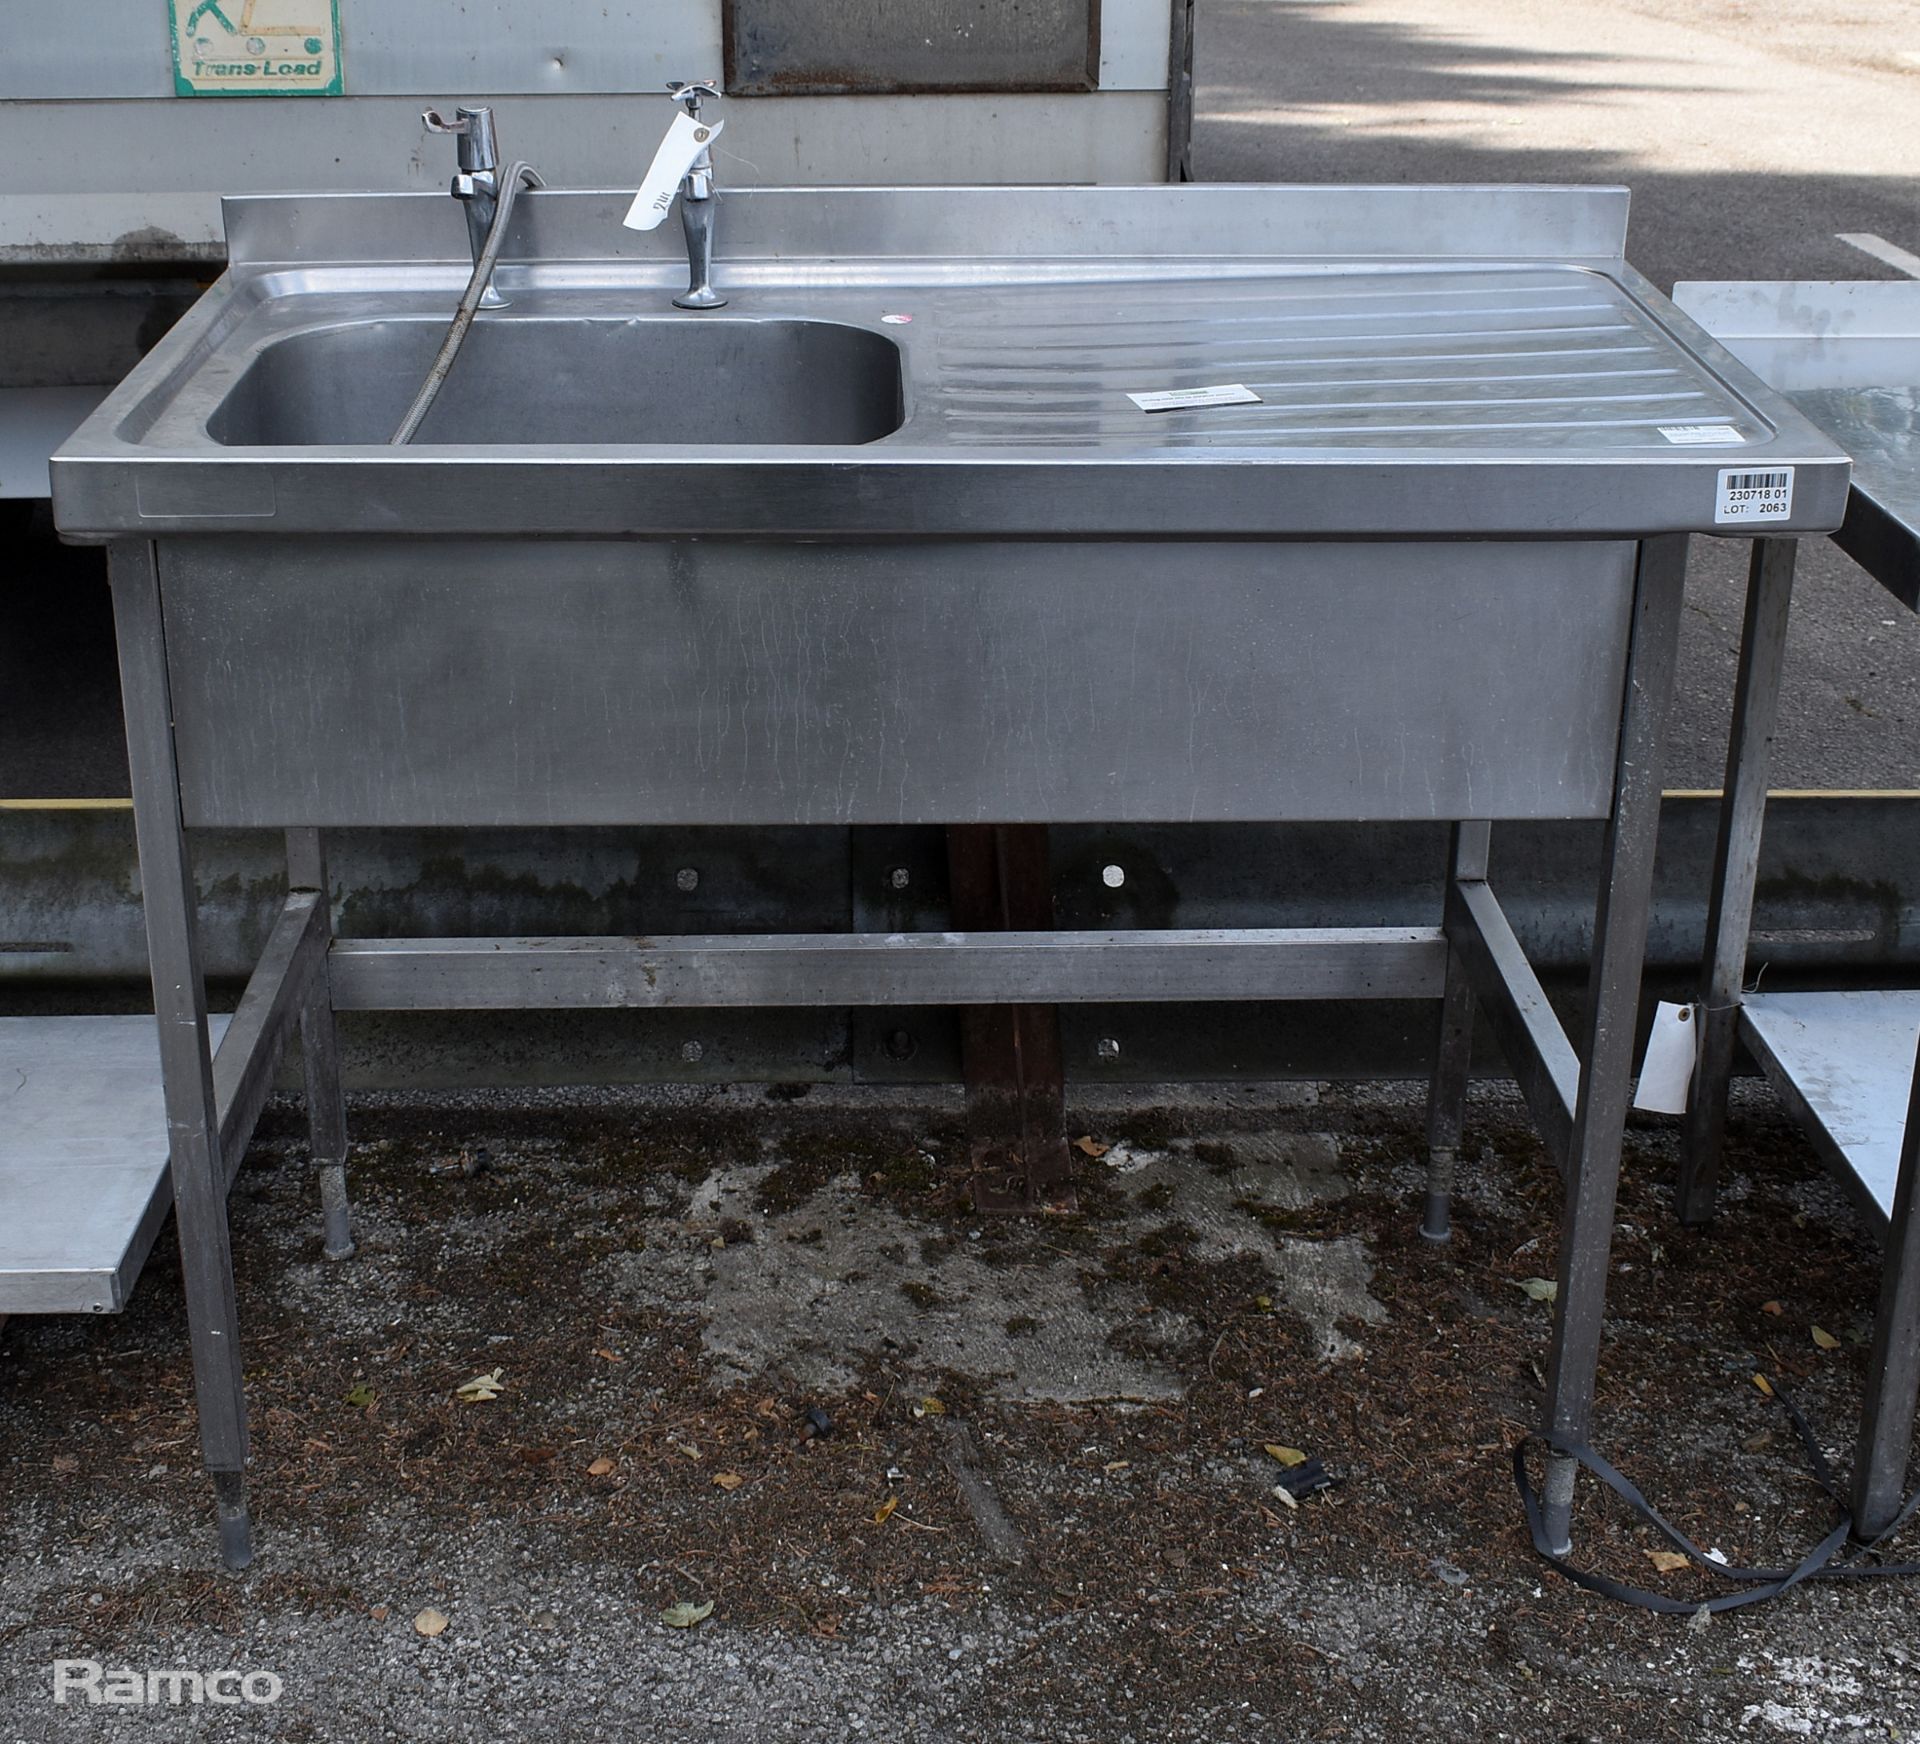 Stainless steel sink unit with upstand - L 1200 x W 600 x H 1100mm